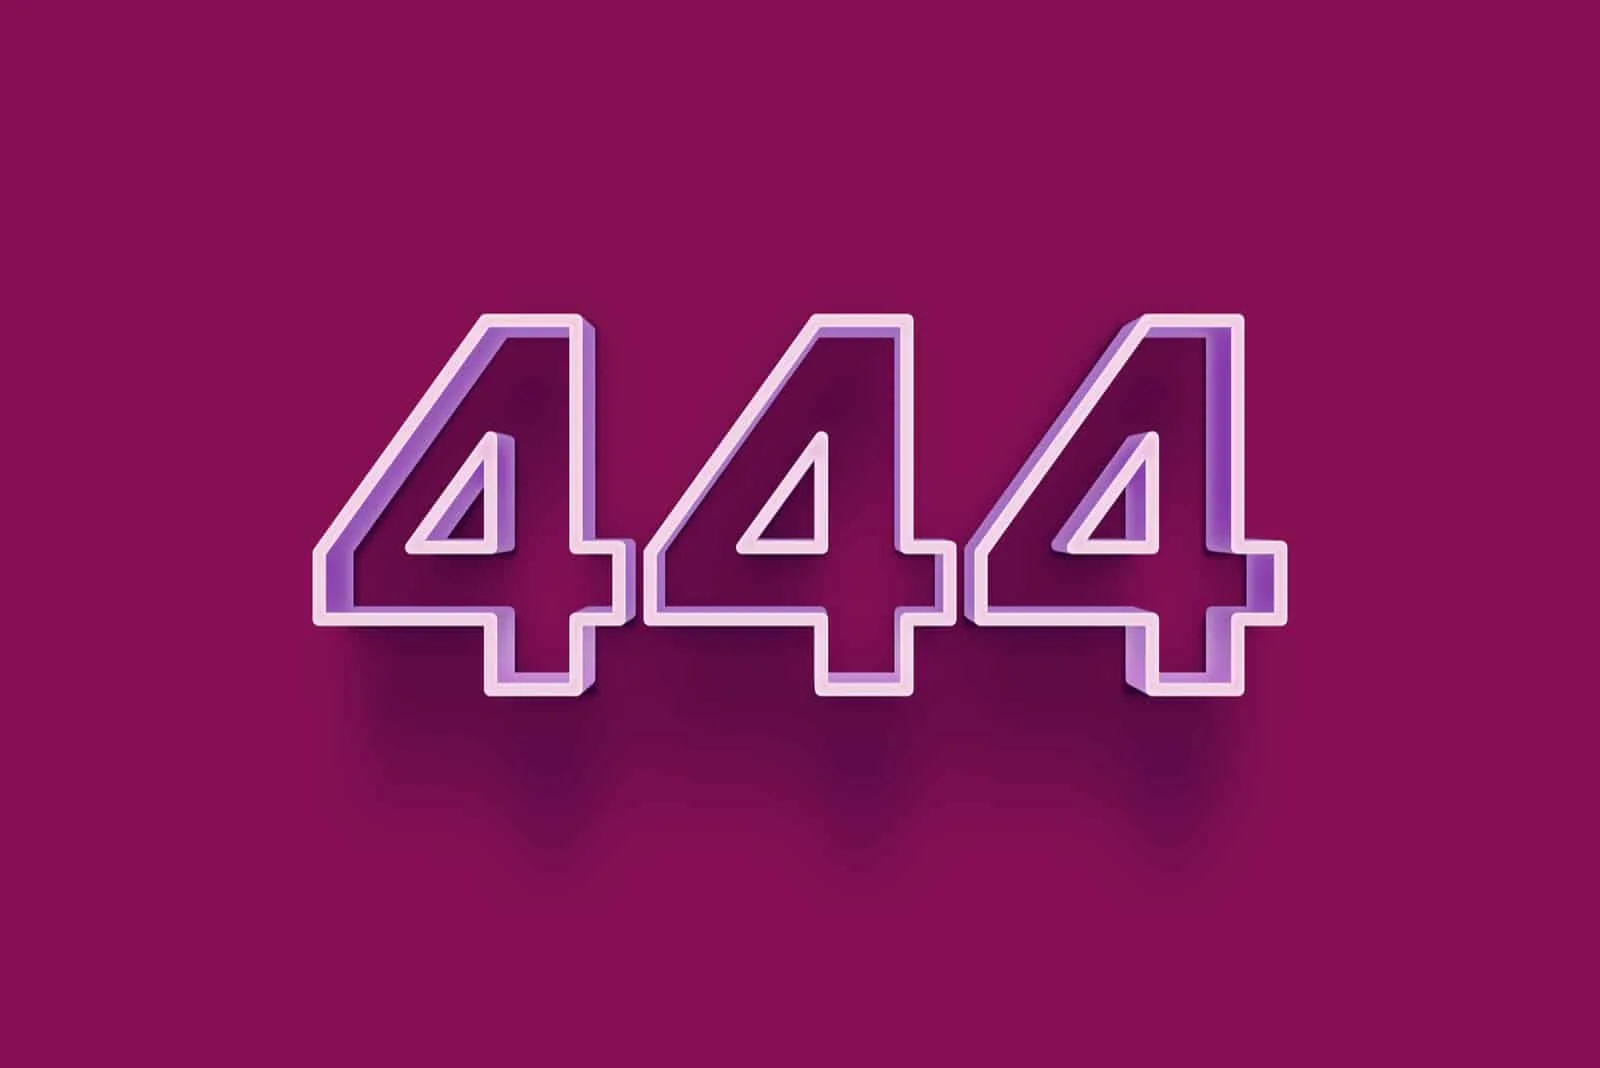 444 angel number and its meaning